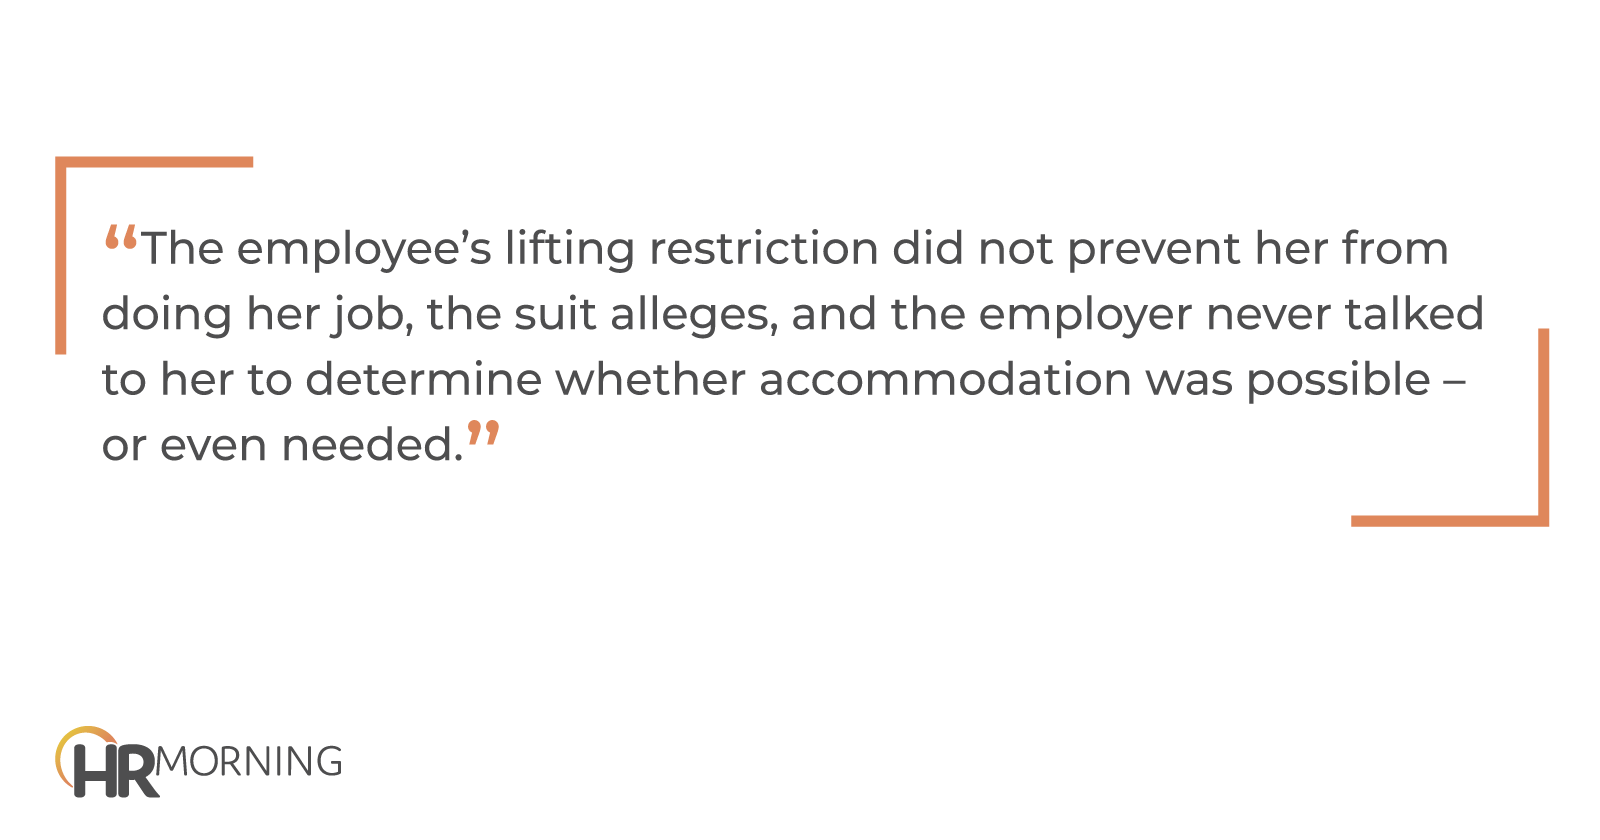 "The employee's lifting restriction did not prevent her from doing her job, the suit alleges, and the employer never talked to her to determine whether accommodation was possible – or even needed."